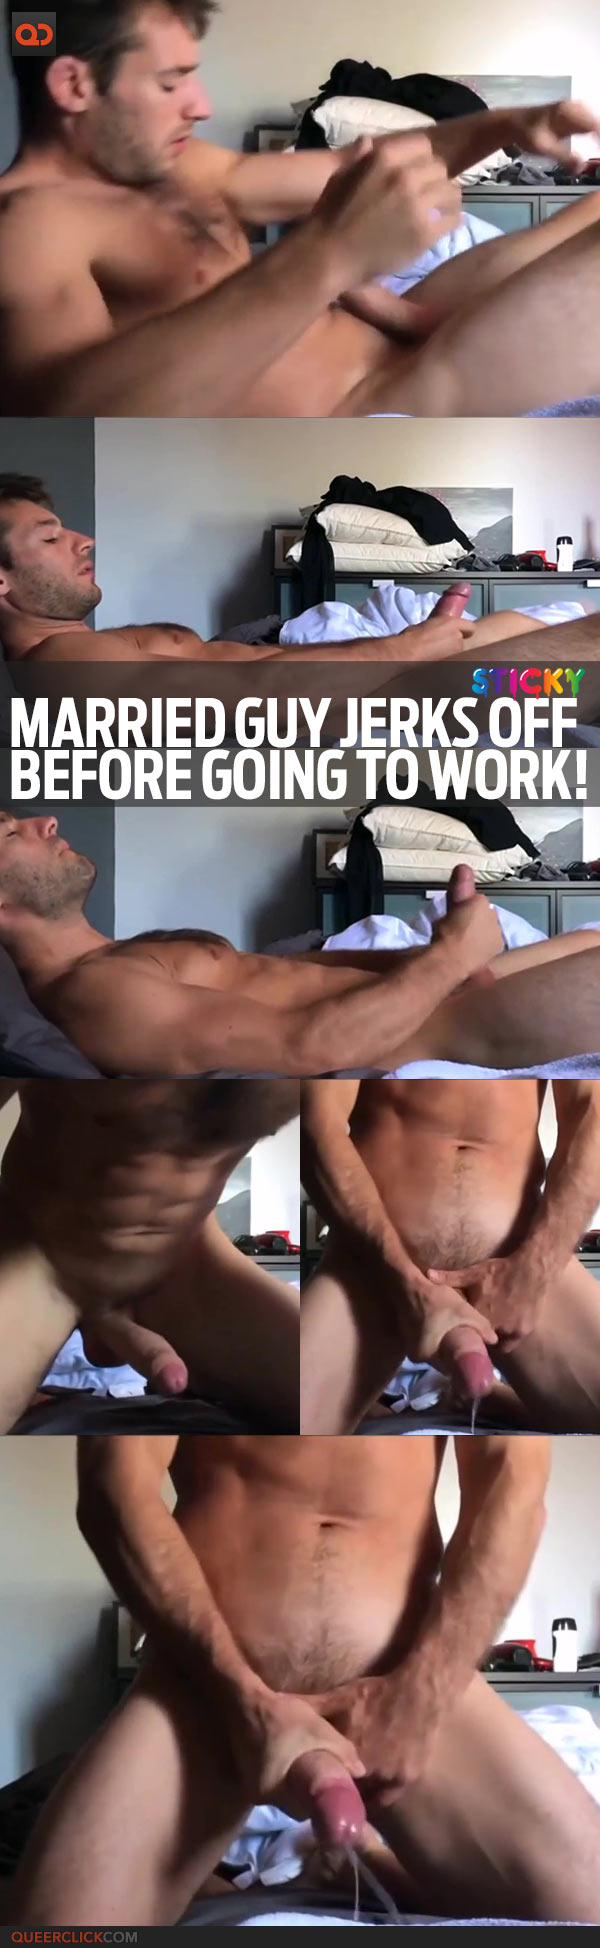 Married Guy Jerks Off Before Going To Work!